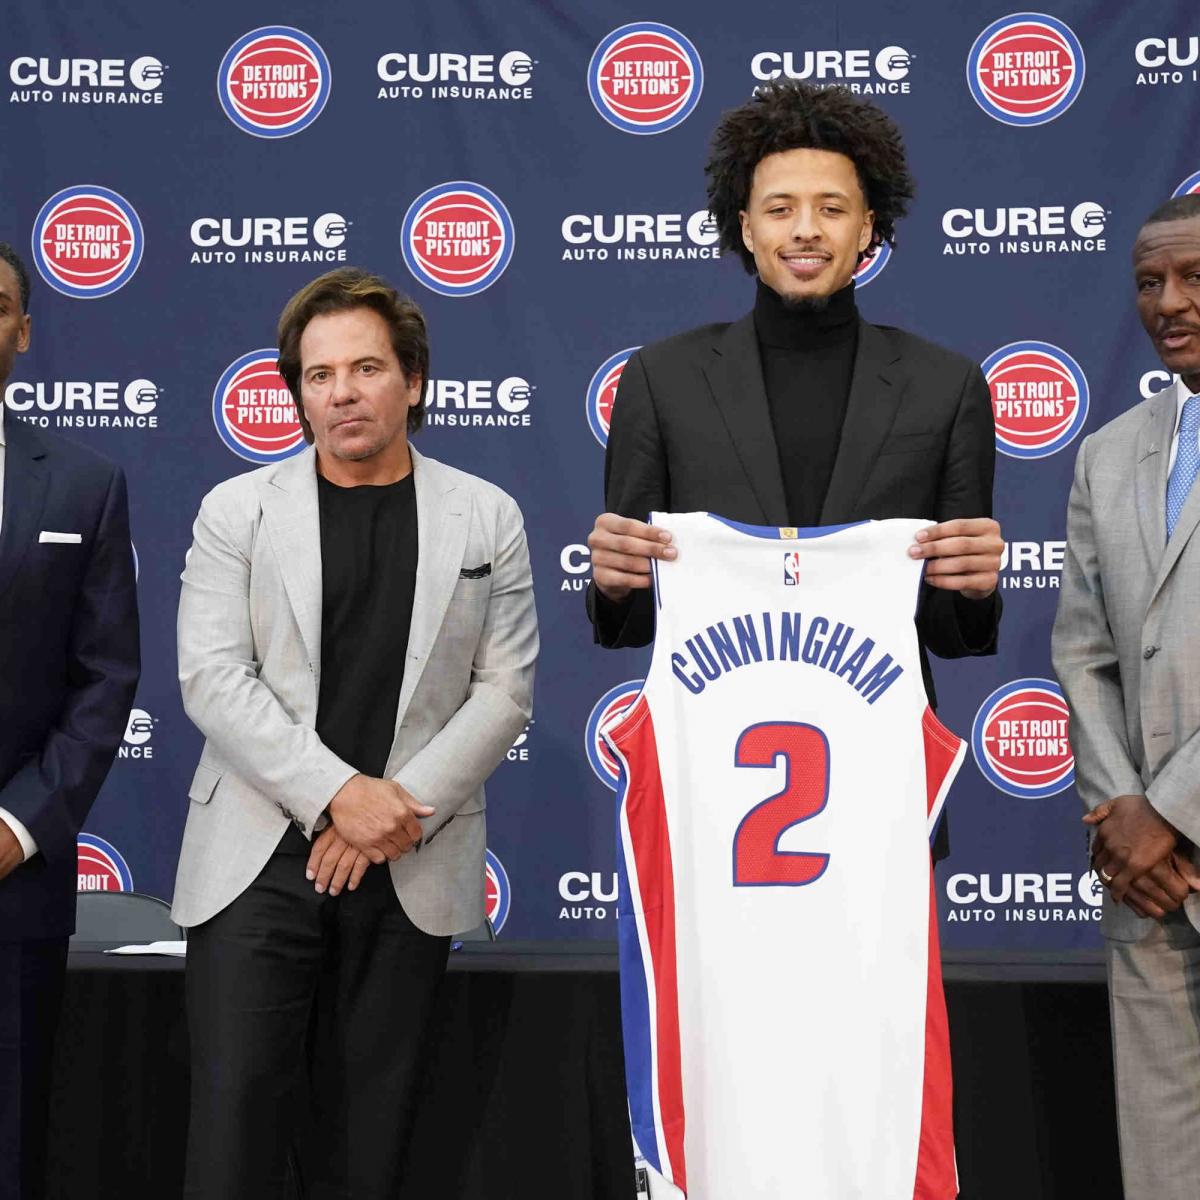 Cade Cunningham Signs Pistons Rookie Contract After Being Drafted No. 1 General